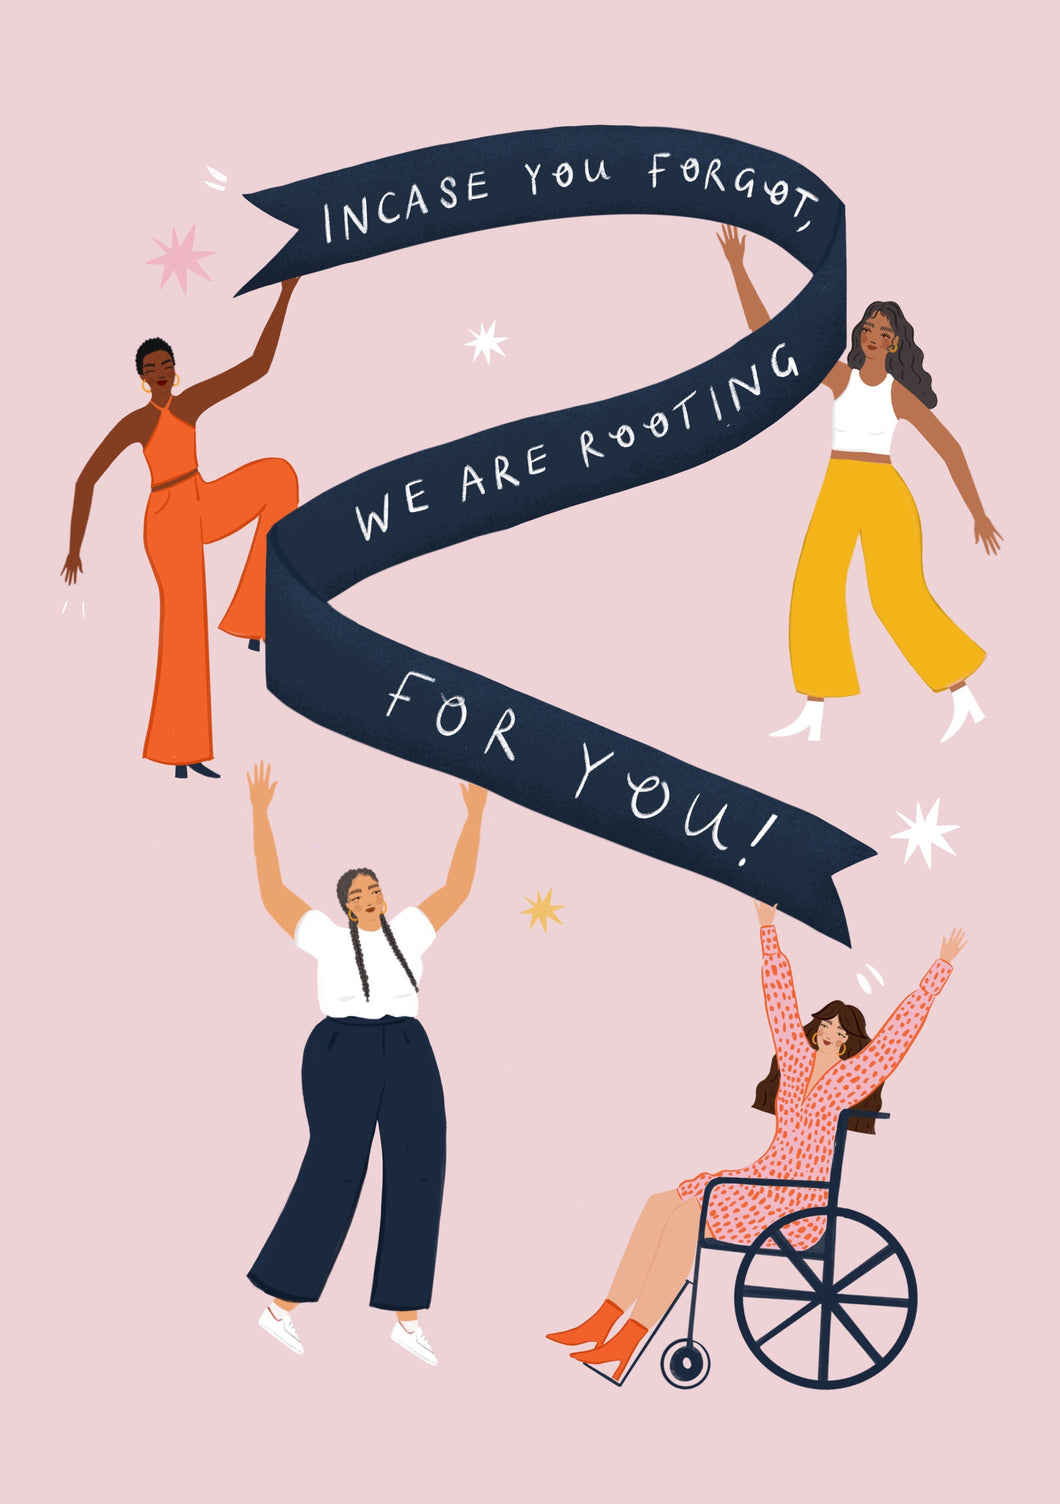 Rooting for You - Print